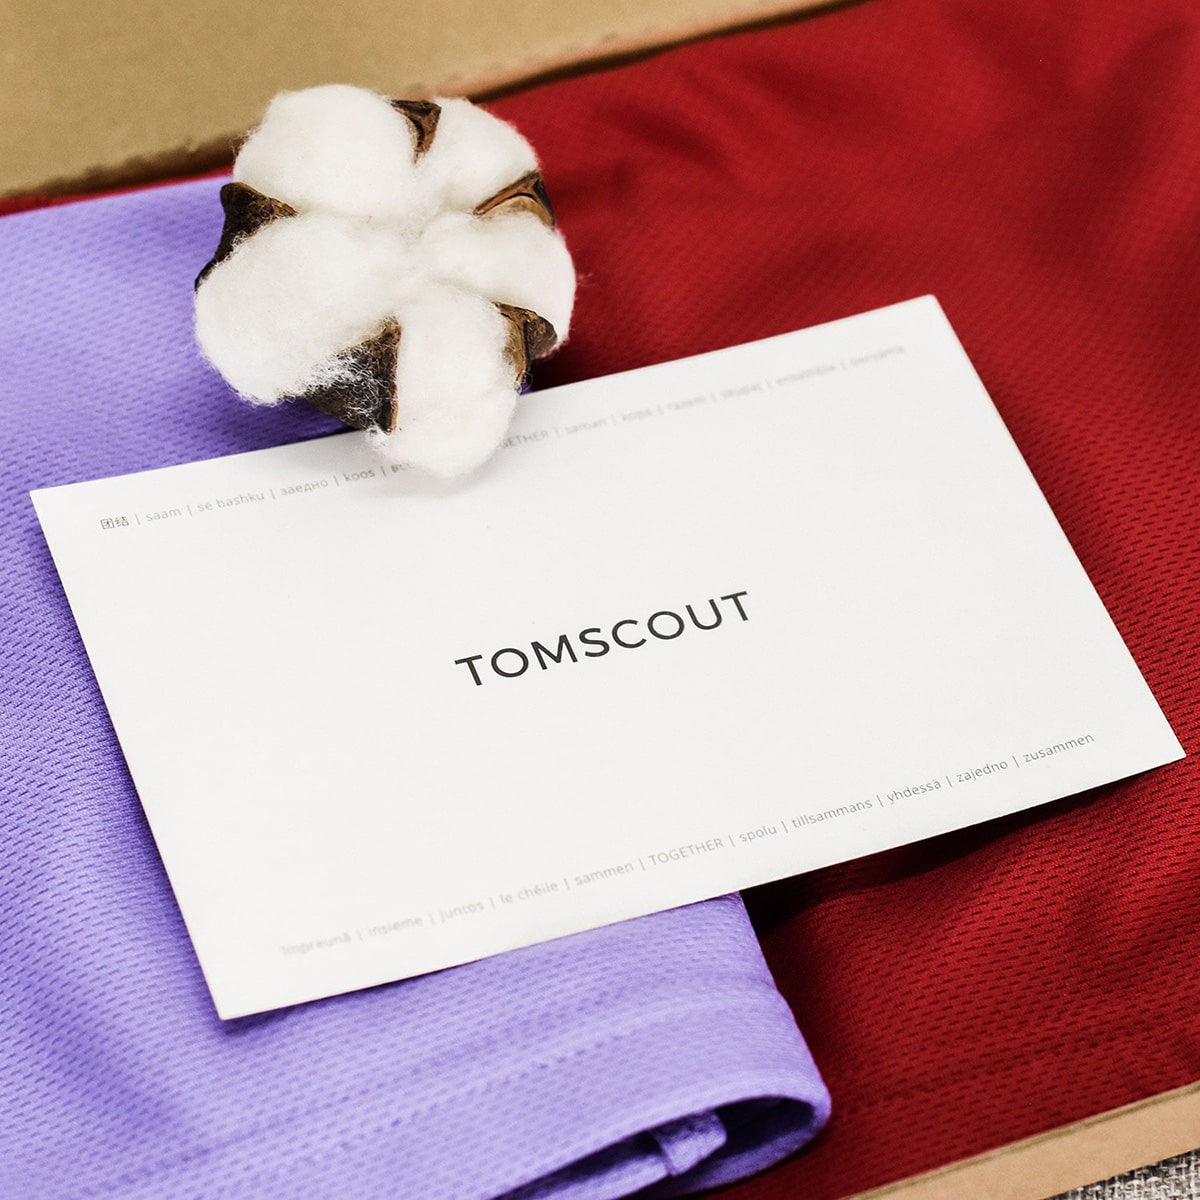 Inside a gift box, two Chest Binders in lavender purple and scarlet red colors are neatly arranged alongside a TOMSCOUT inspirational thank you card, symbolizing wholehearted support for the LGBTQ community. TOMSCOUT Free Chest Binder Program, The Freedom Binder